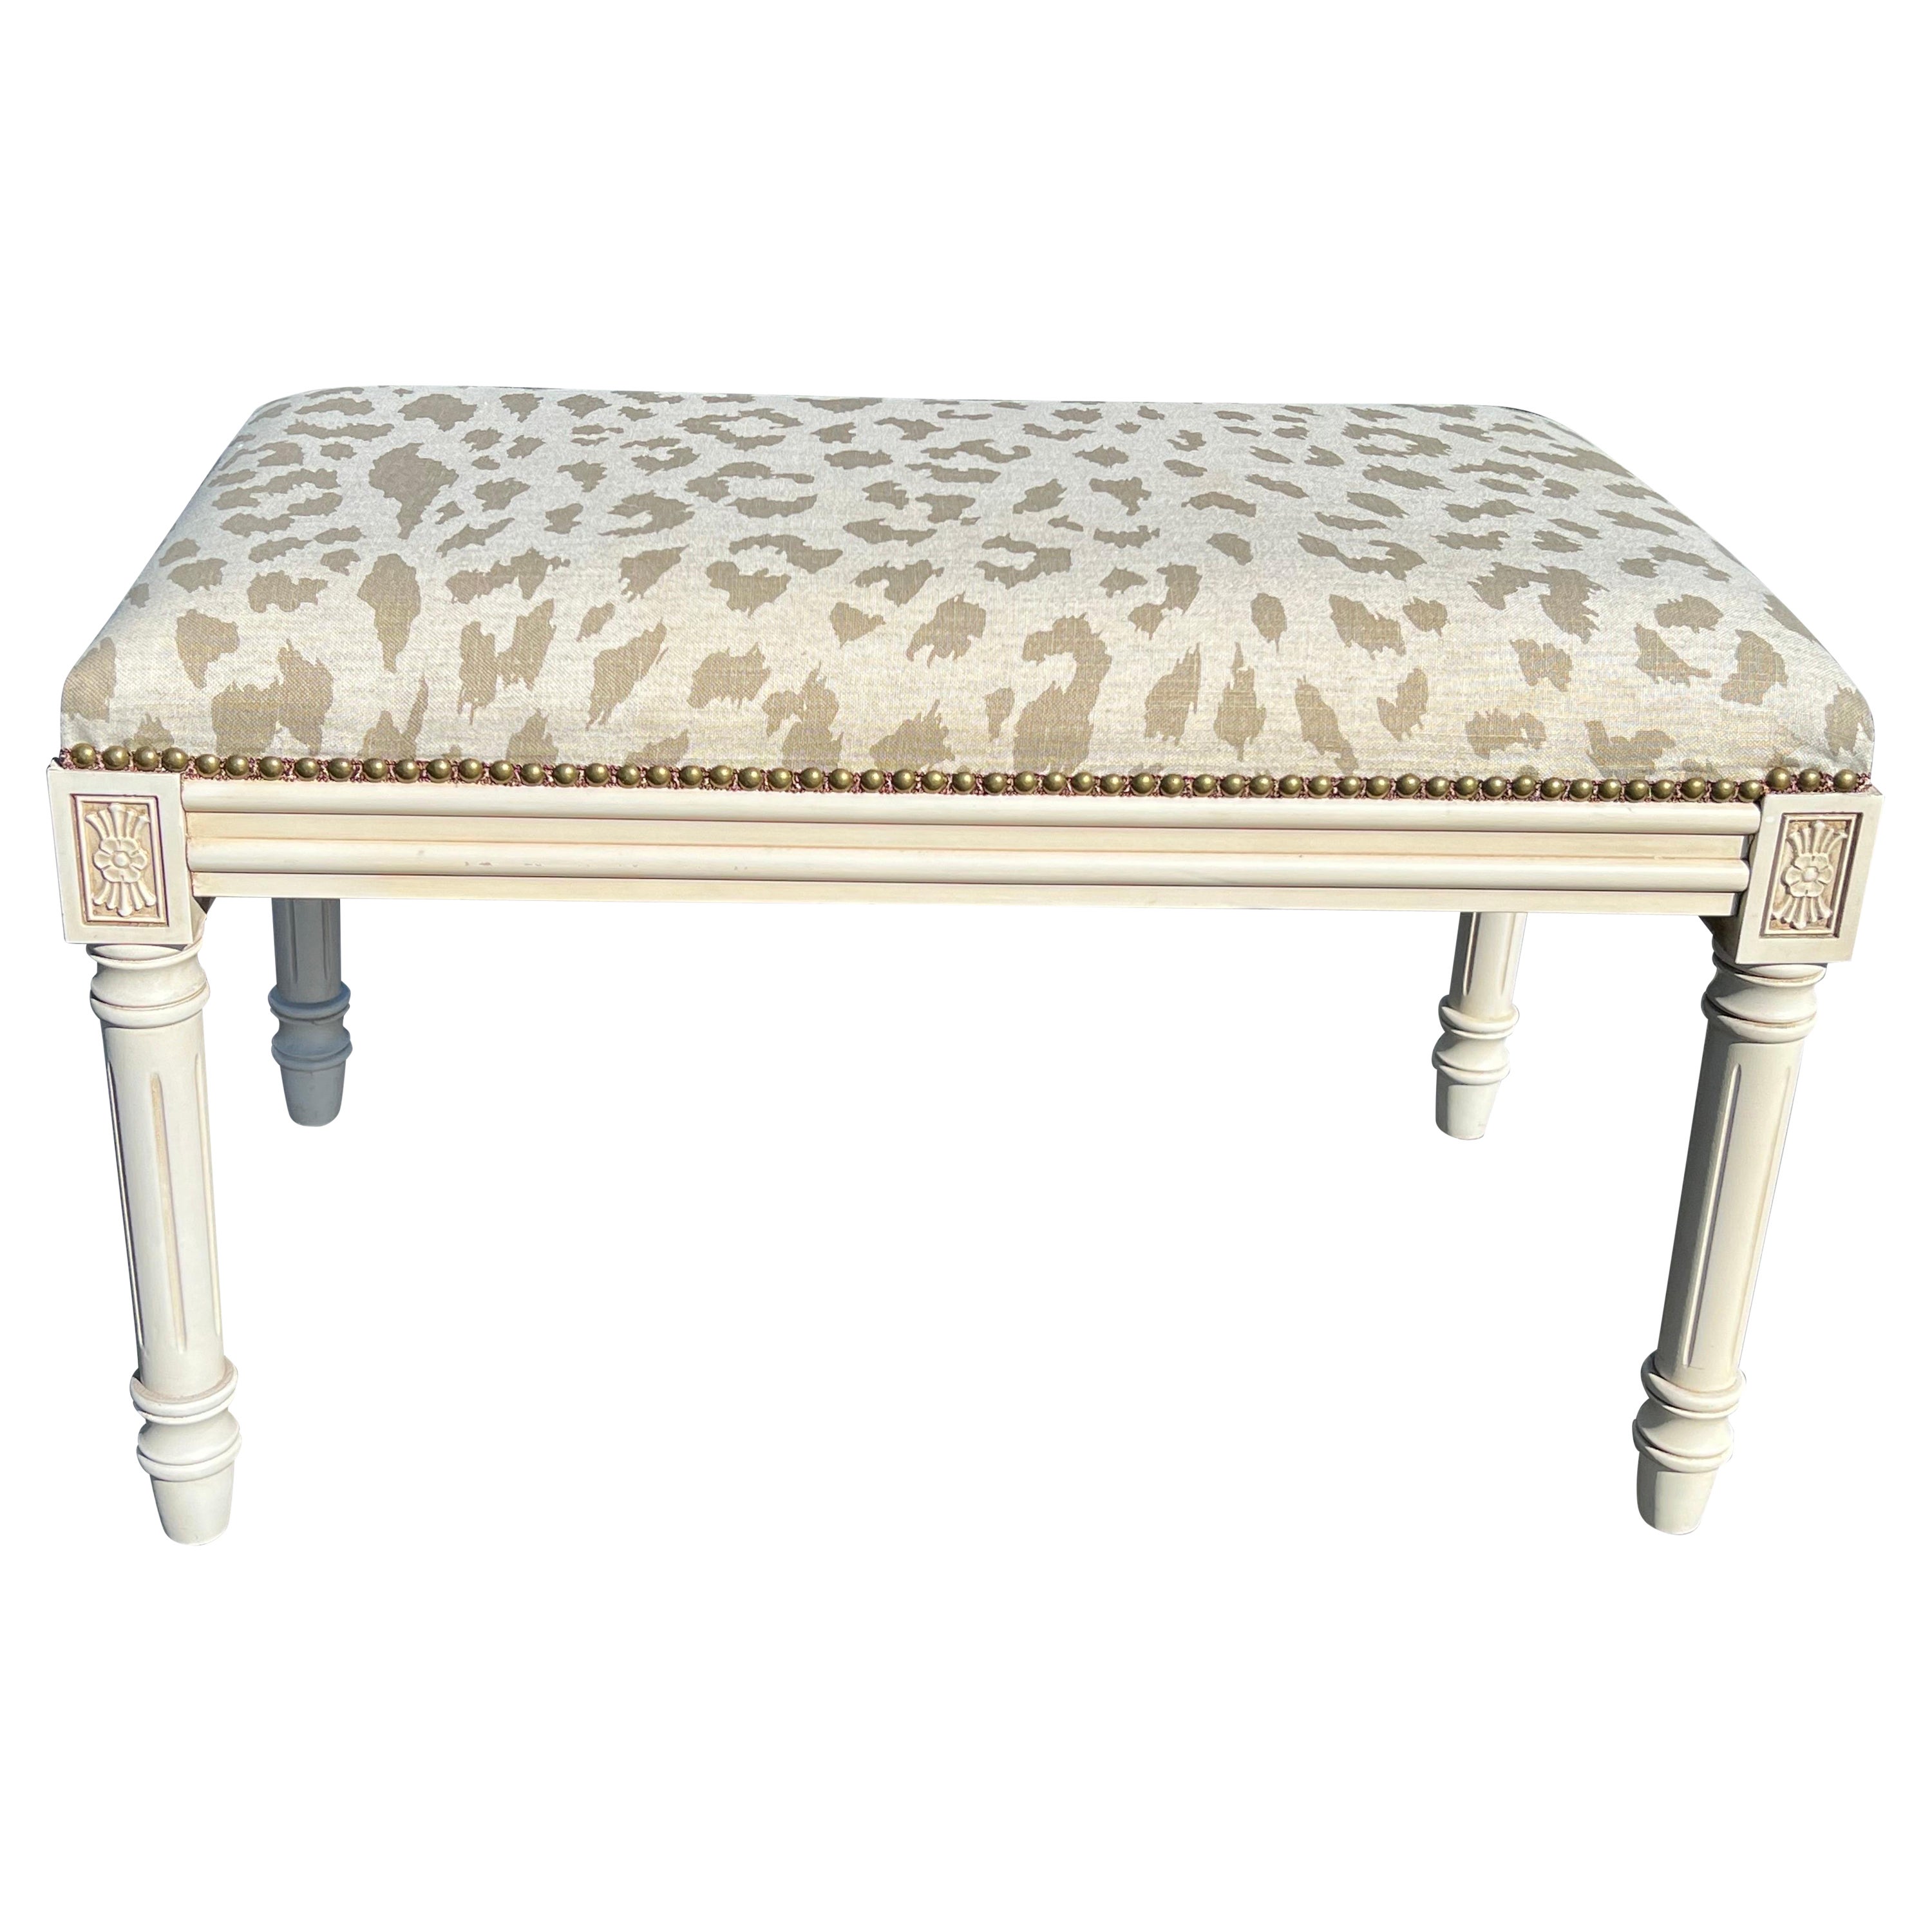 Upholstered Bench with Animal Print